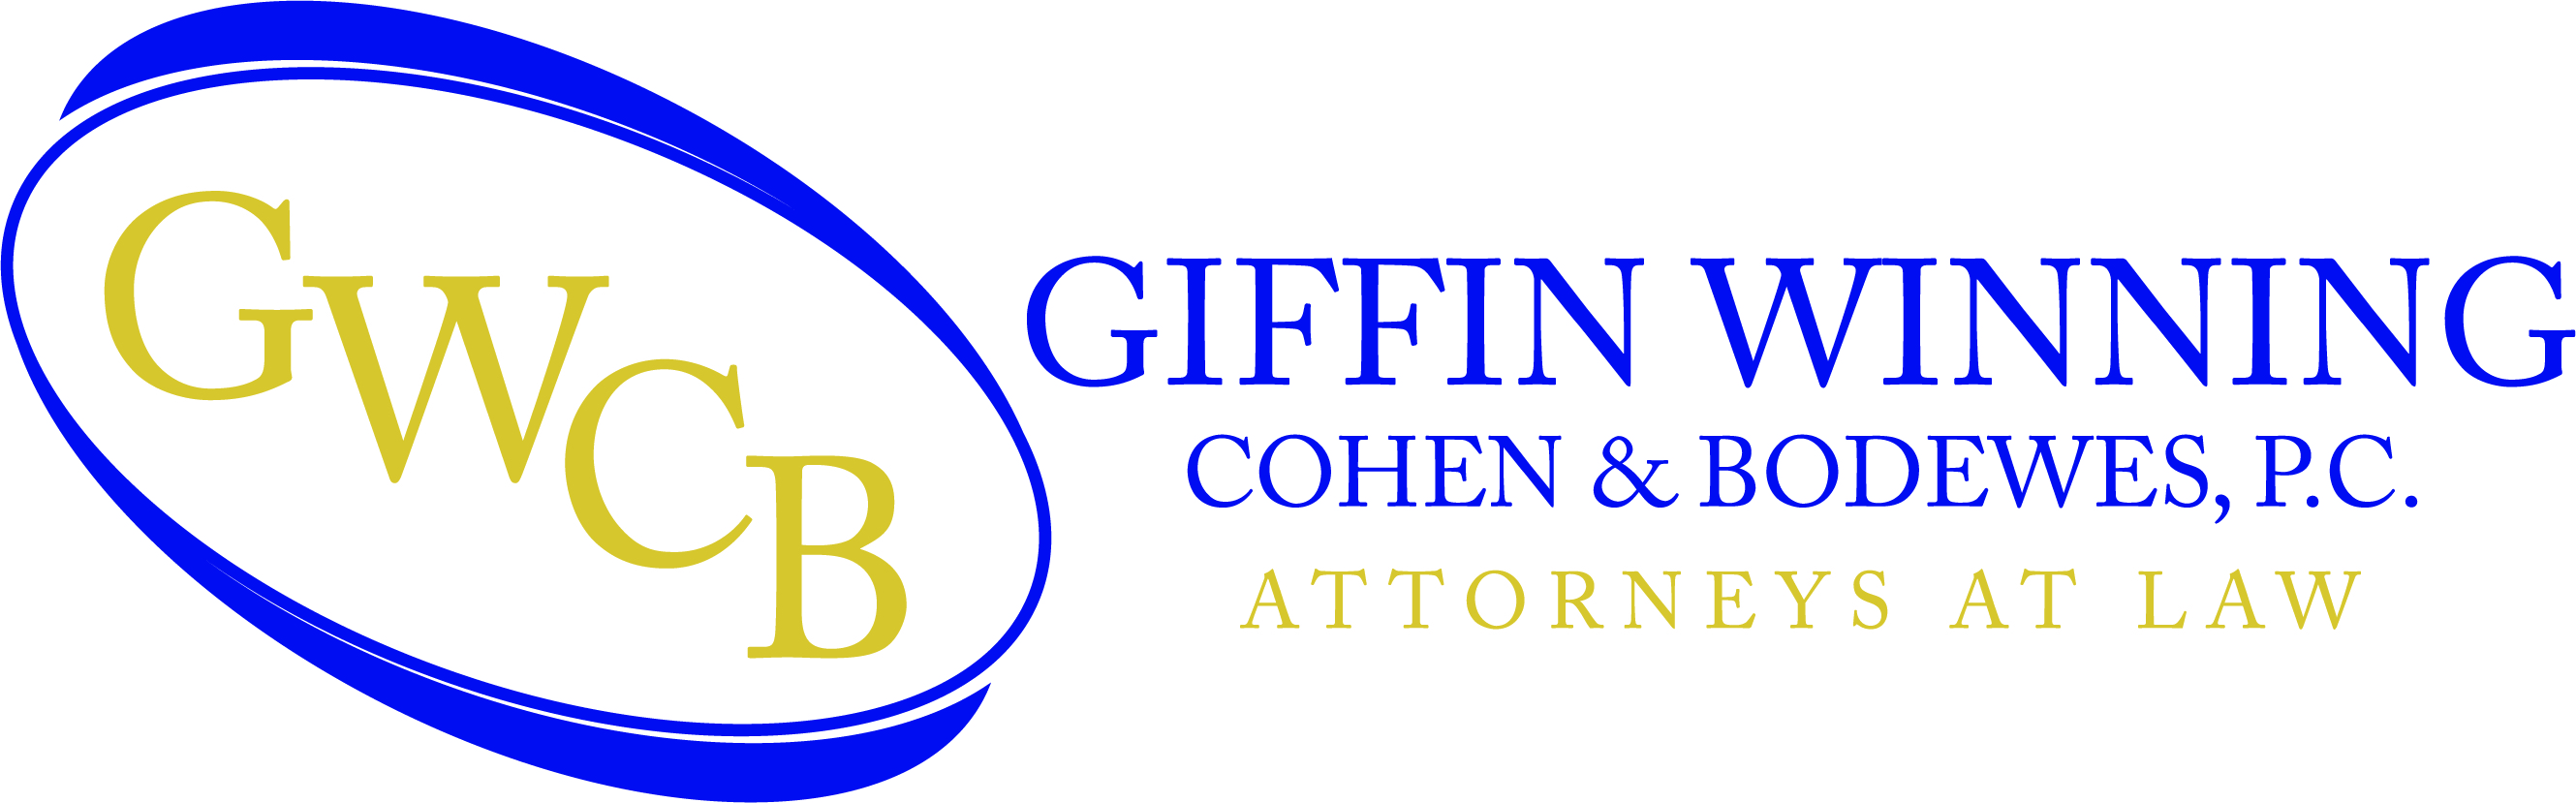 Giffin Winning Cohen Bodewes P.C. 